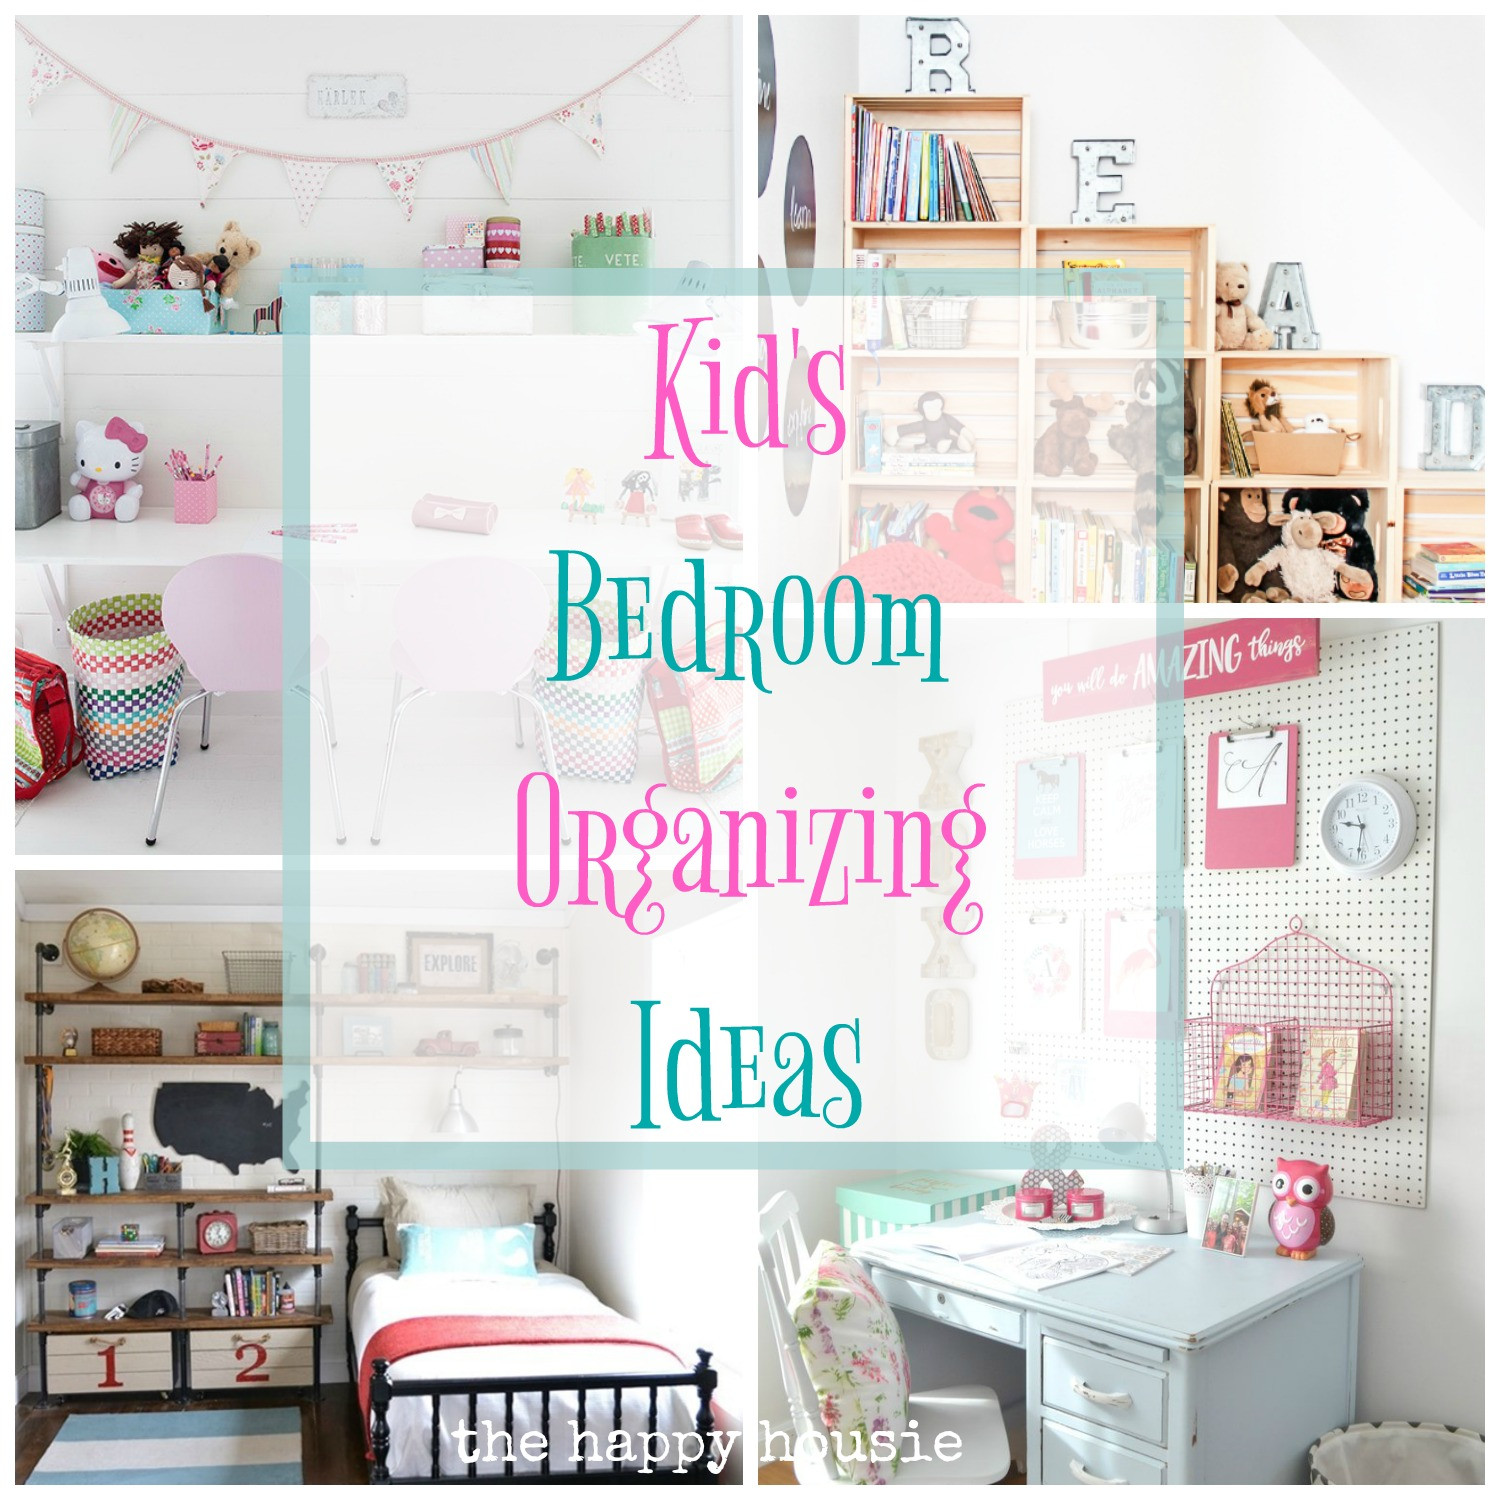 Organization Tips For Bedroom
 Fantastic Ideas for Organizing Kid s Bedrooms The Happy